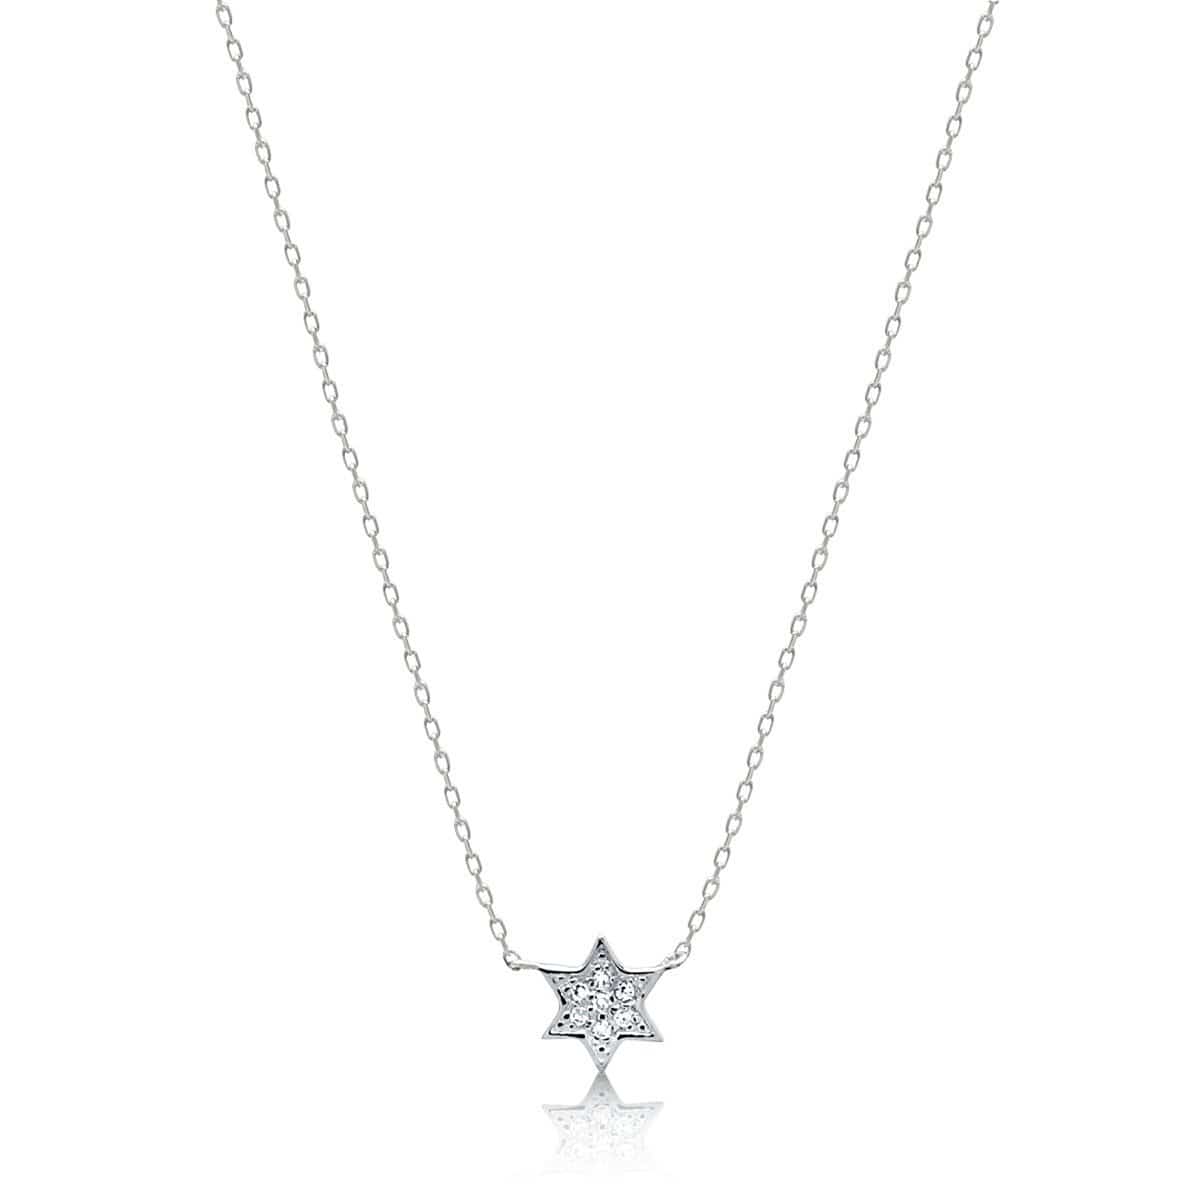 Alef Bet Necklaces White Gold Petite Diamond Jewish Star Necklace in 14k Gold, White Gold or Rose Gold